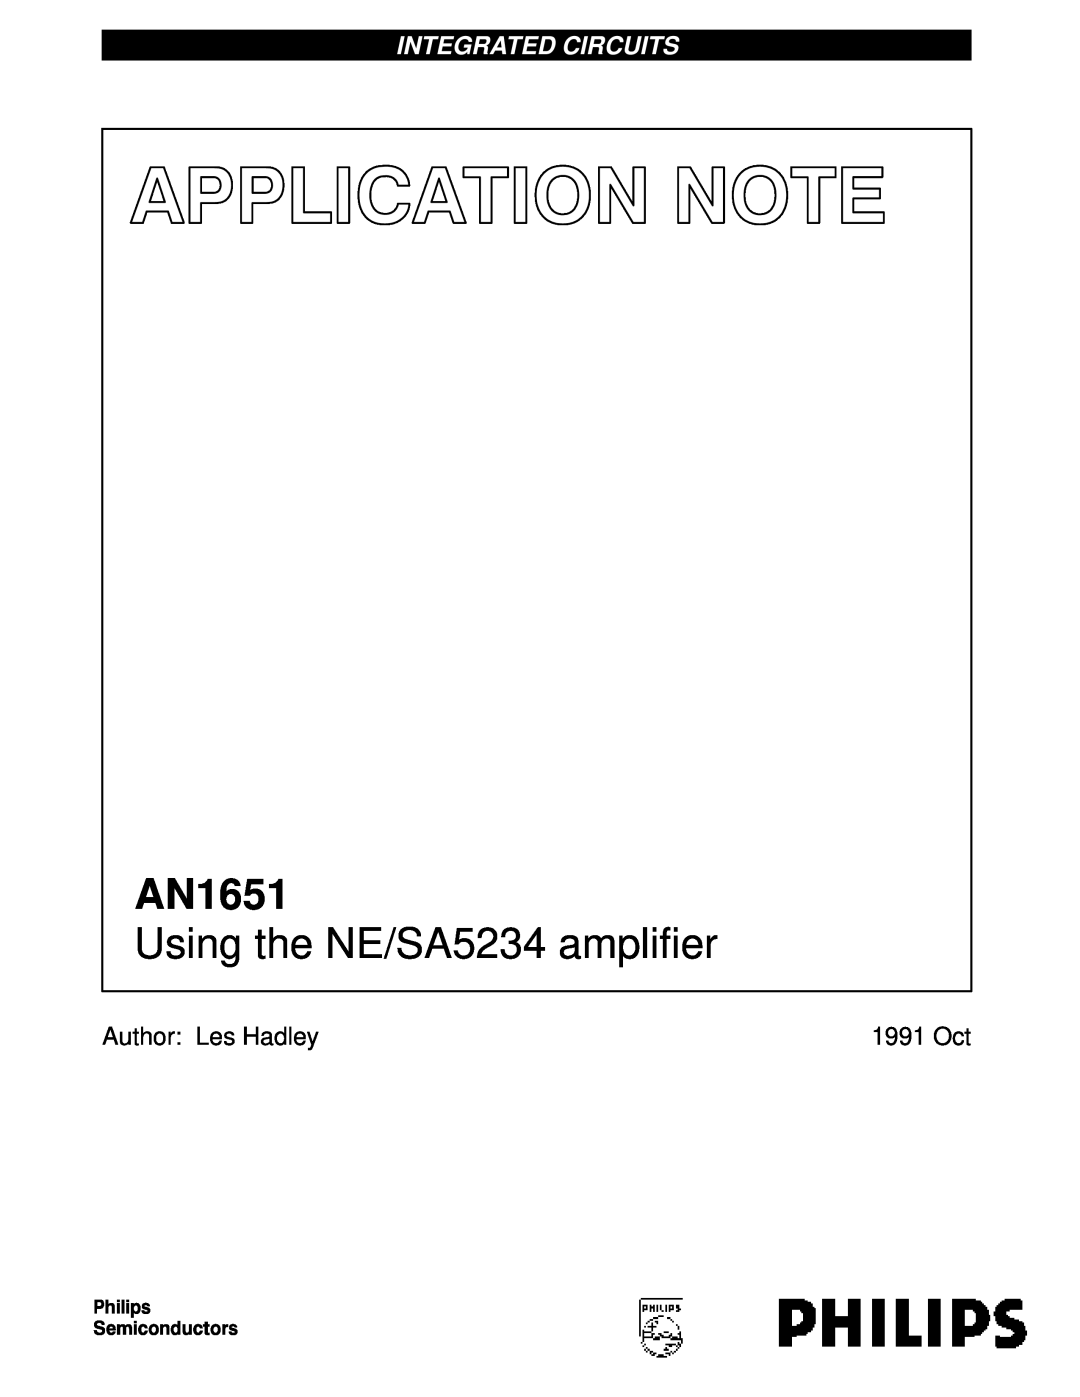 Philips AN1651 manual Author Les Hadley, Using the NE/SA5234 amplifier, Integrated Circuits, 1991 Oct 